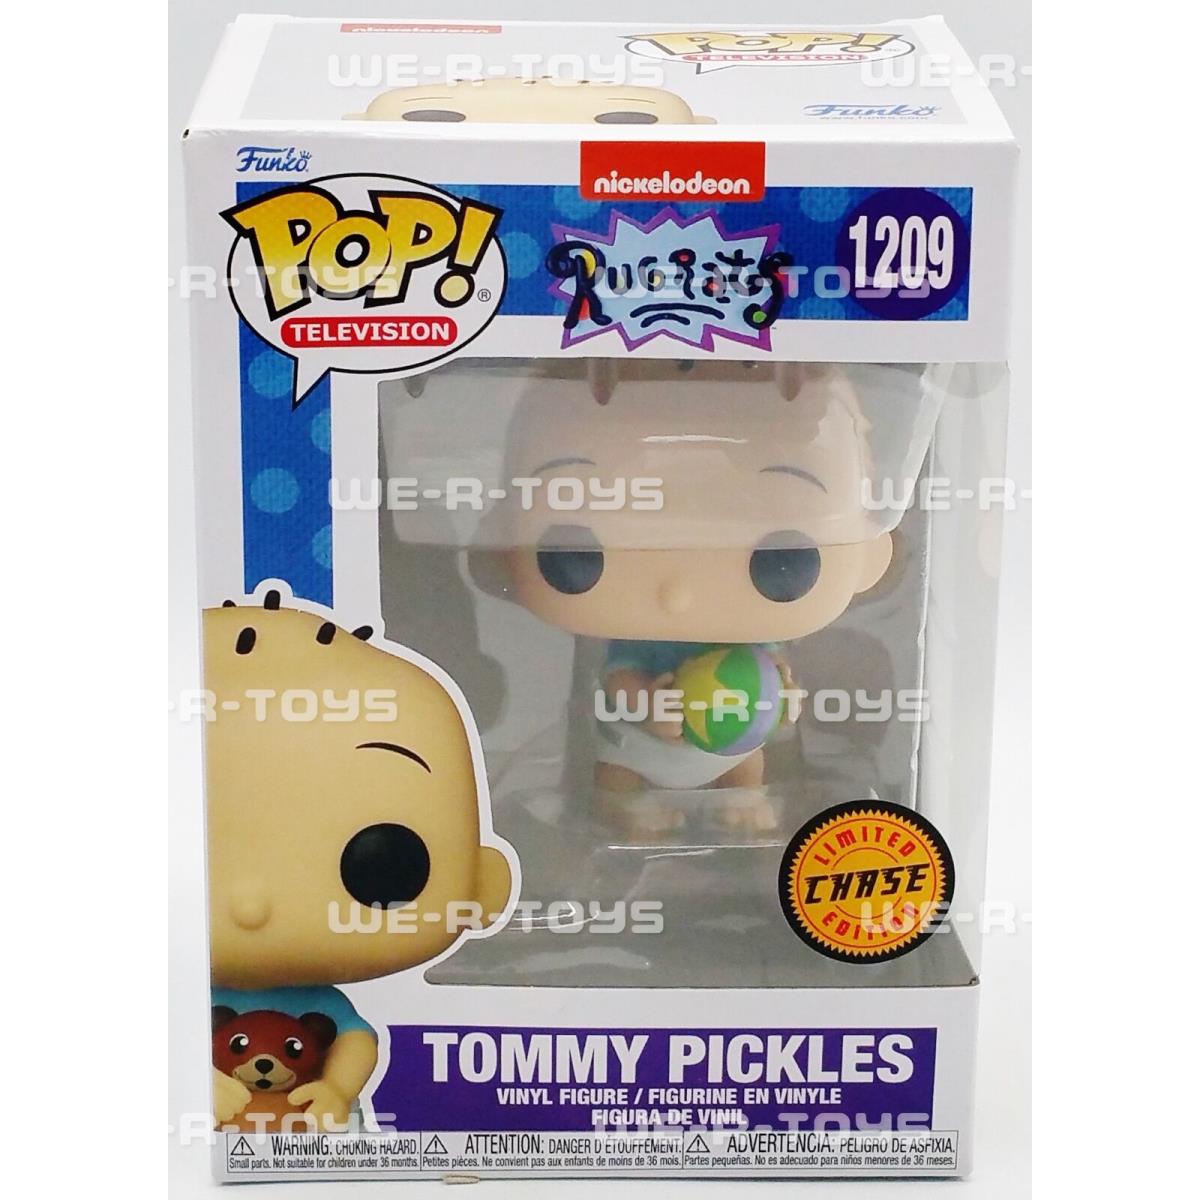 Rugrats Tommy Pickles Limited Chase Edition Funko Pop Toy 1209